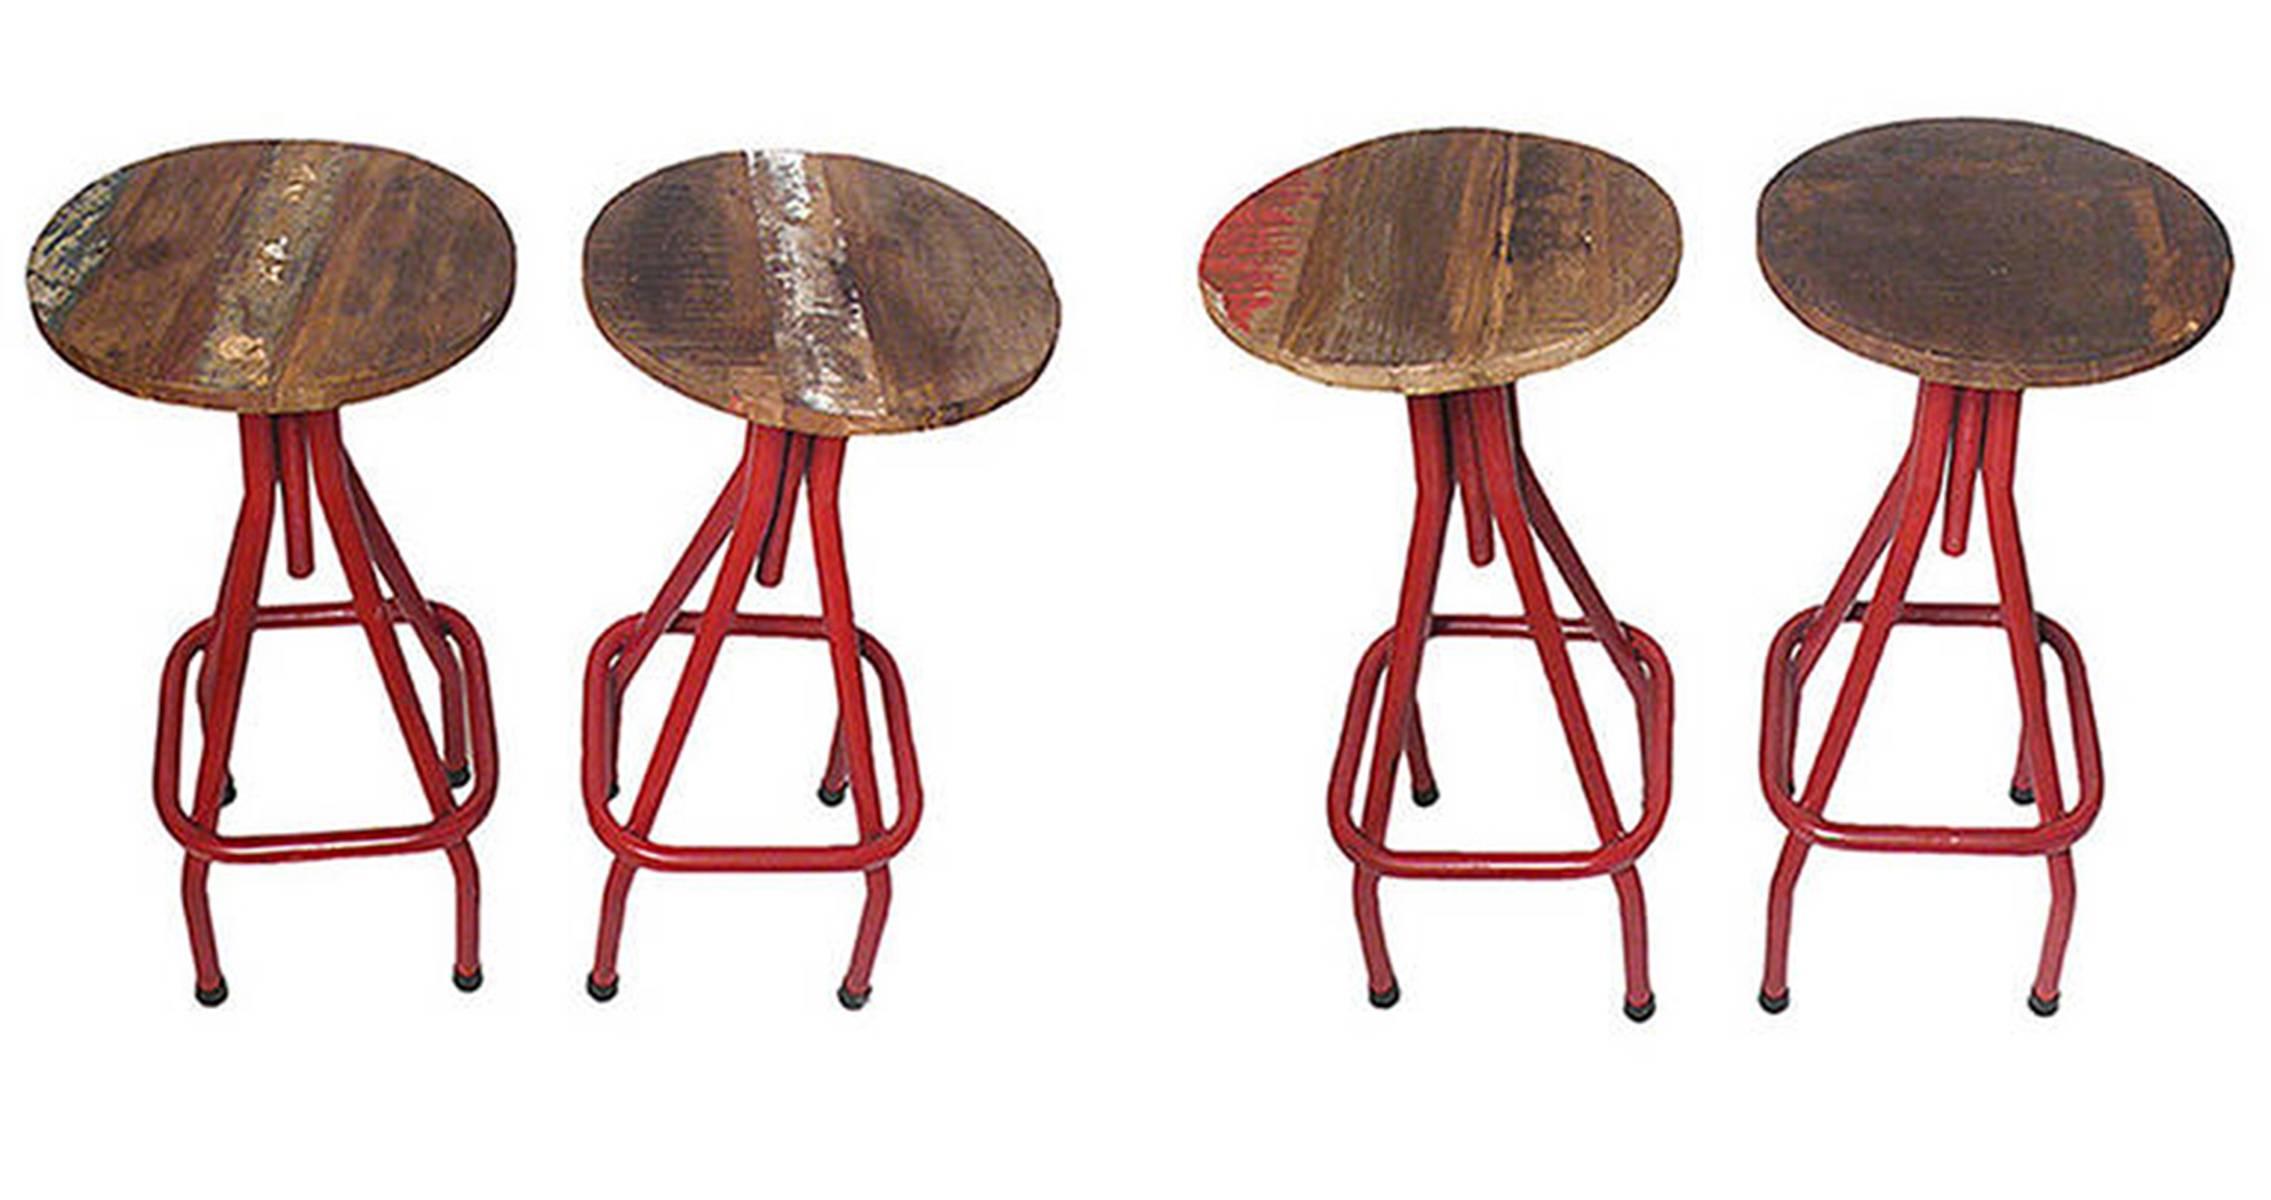 Industrial Stools with Red Painted Tubular Iron Legs and Wooden Seats 3